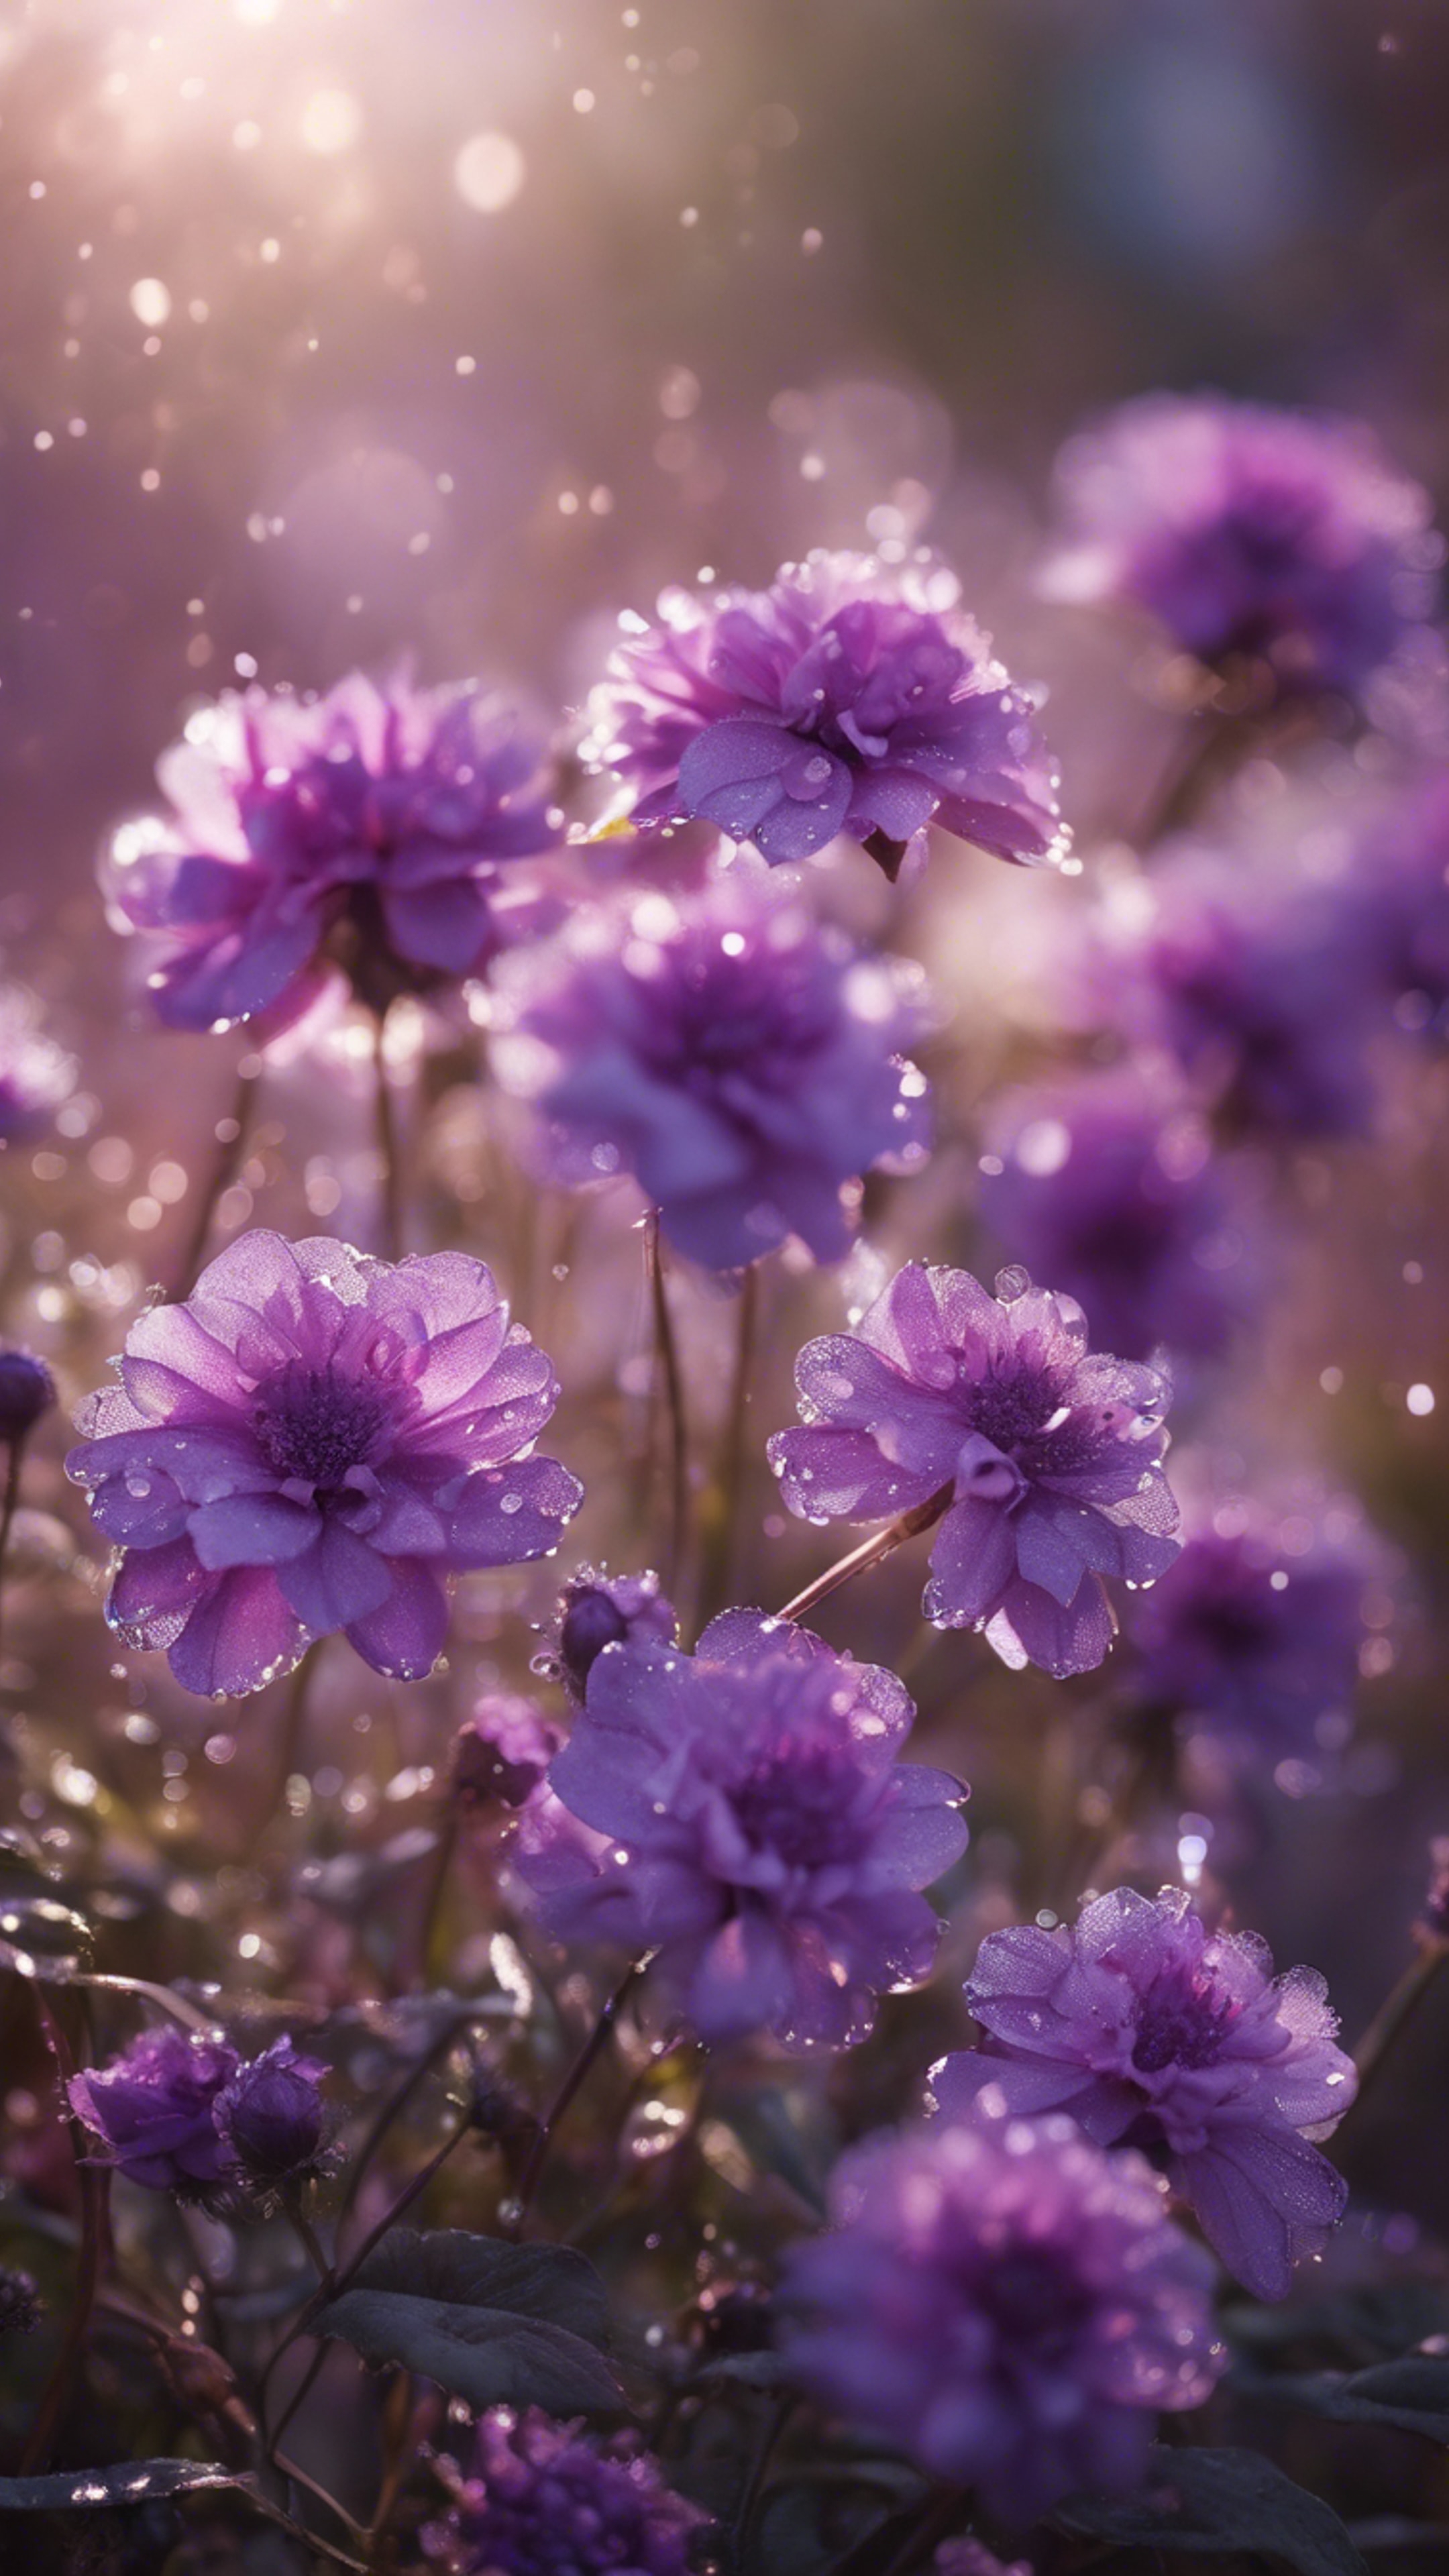 An impressive collage of purple flowers in full bloom, highlighted by sparkling morning dew. Wallpaper[23d1df20d4e341739cf3]